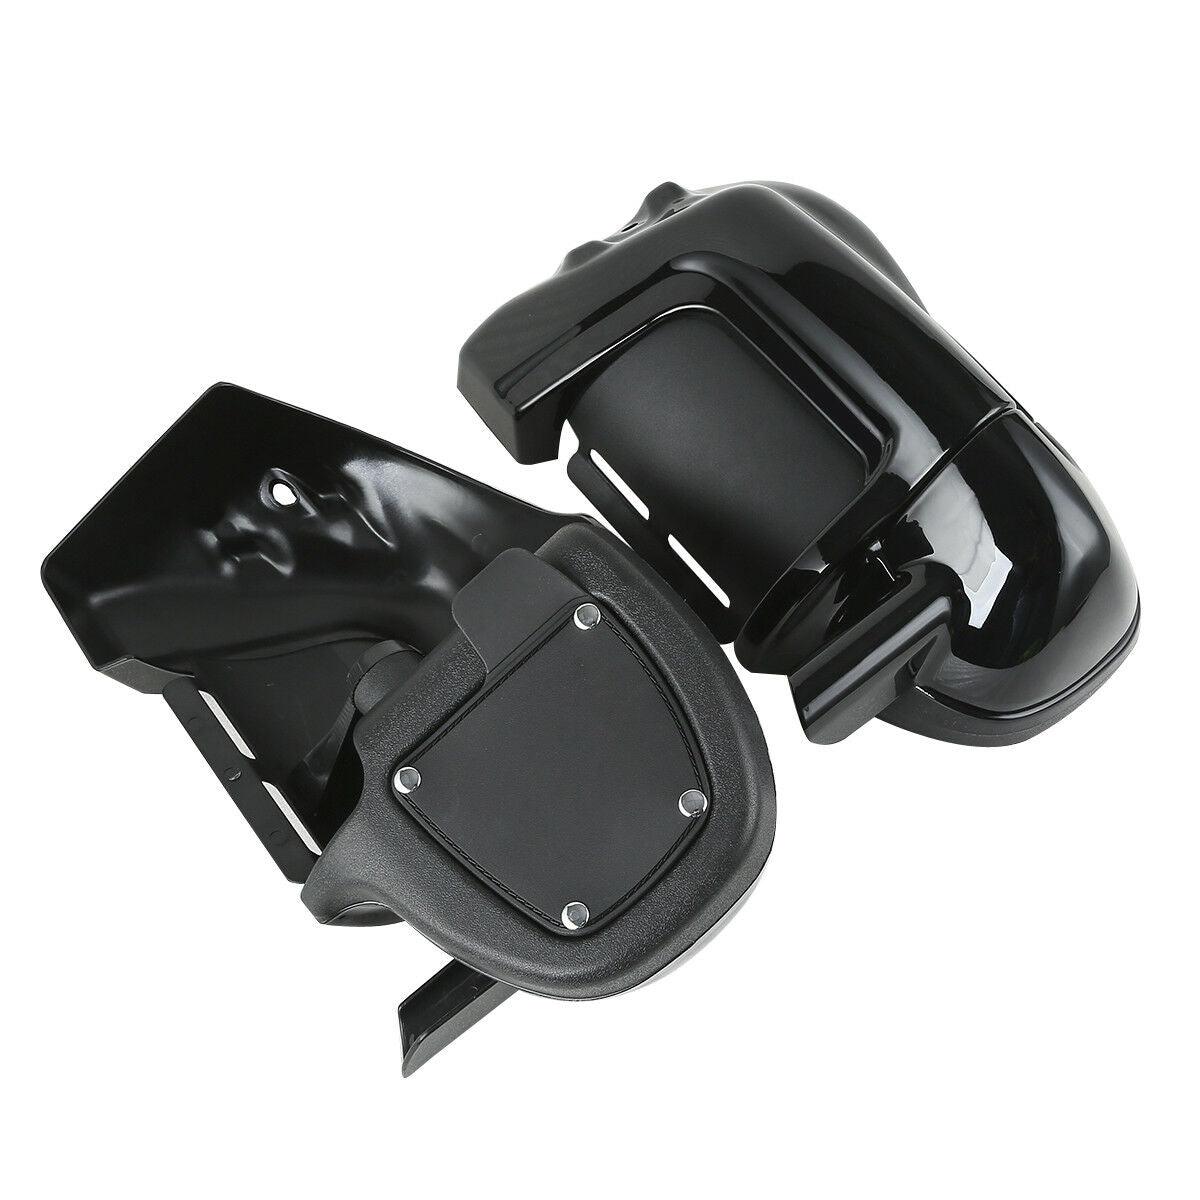 Painted Lower Vented Leg Fairing Glove Box Fit For Harley Road King Tour Glide - Moto Life Products